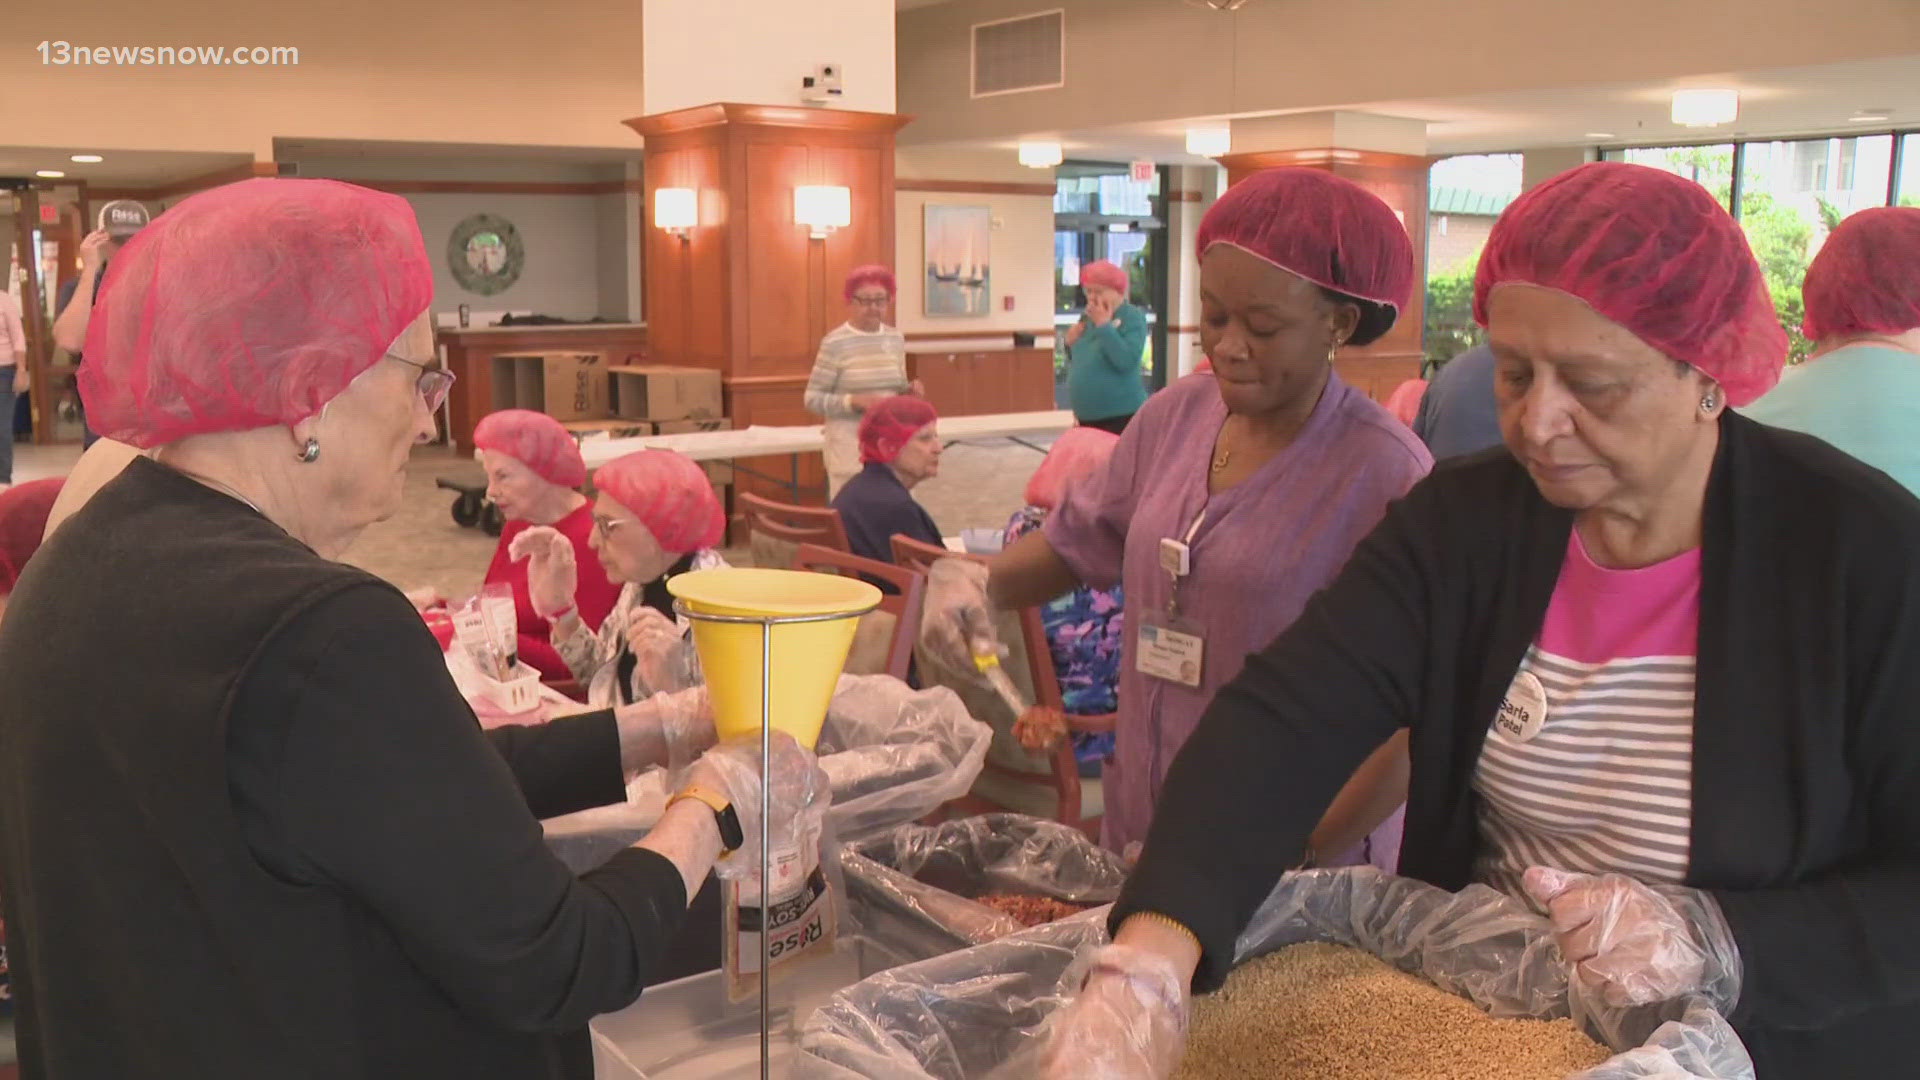 Volunteers in Virginia Beach spent Monday morning putting together meals for families in need across the globe.